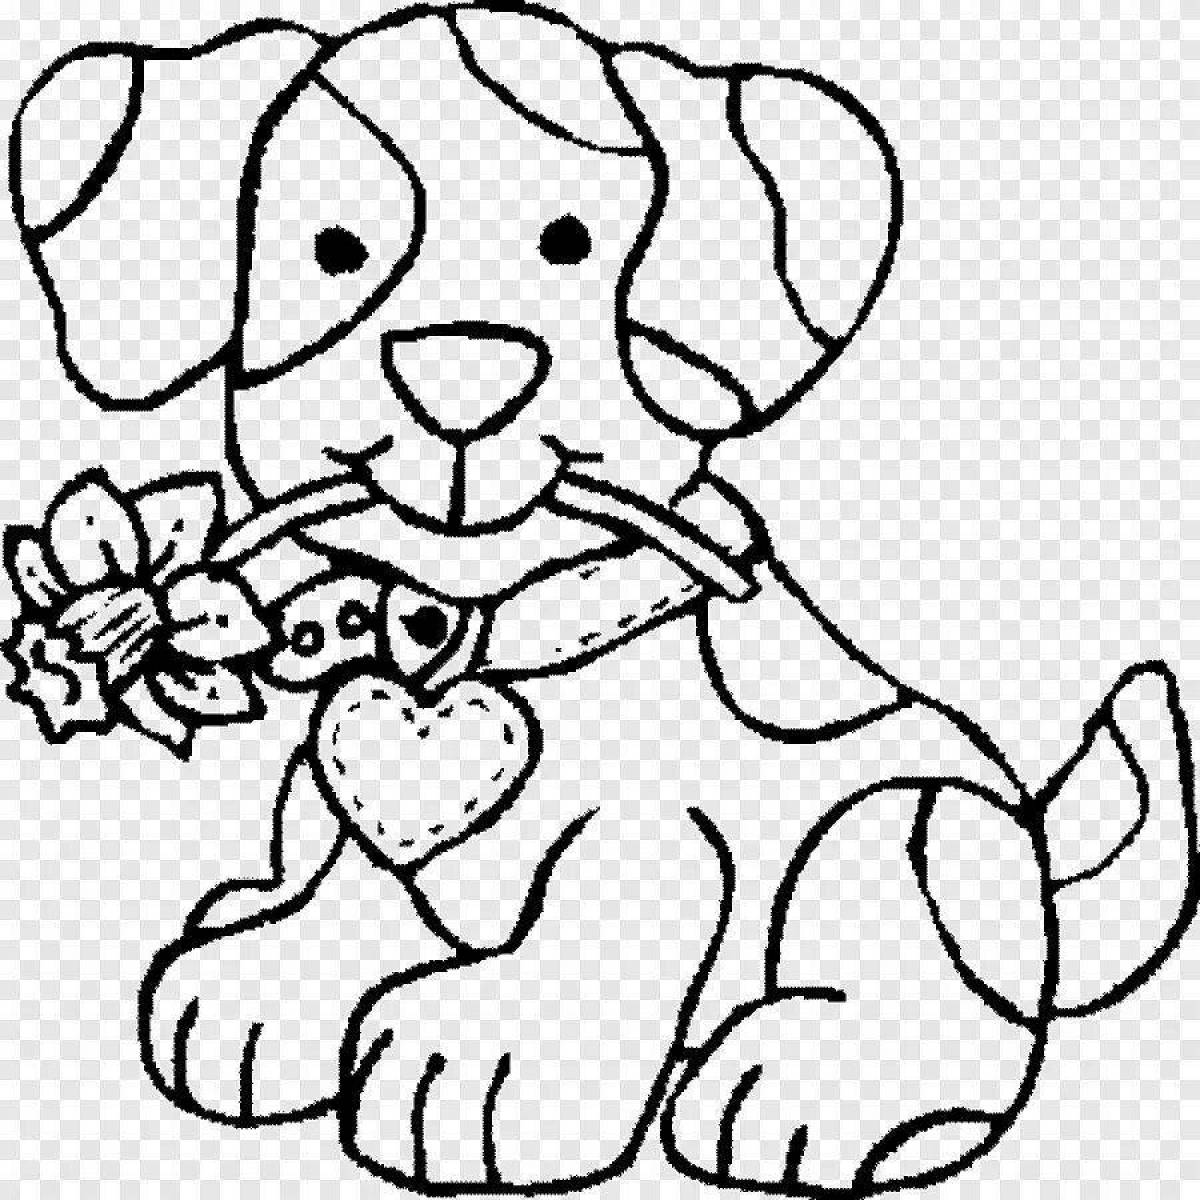 Live coloring for dogs